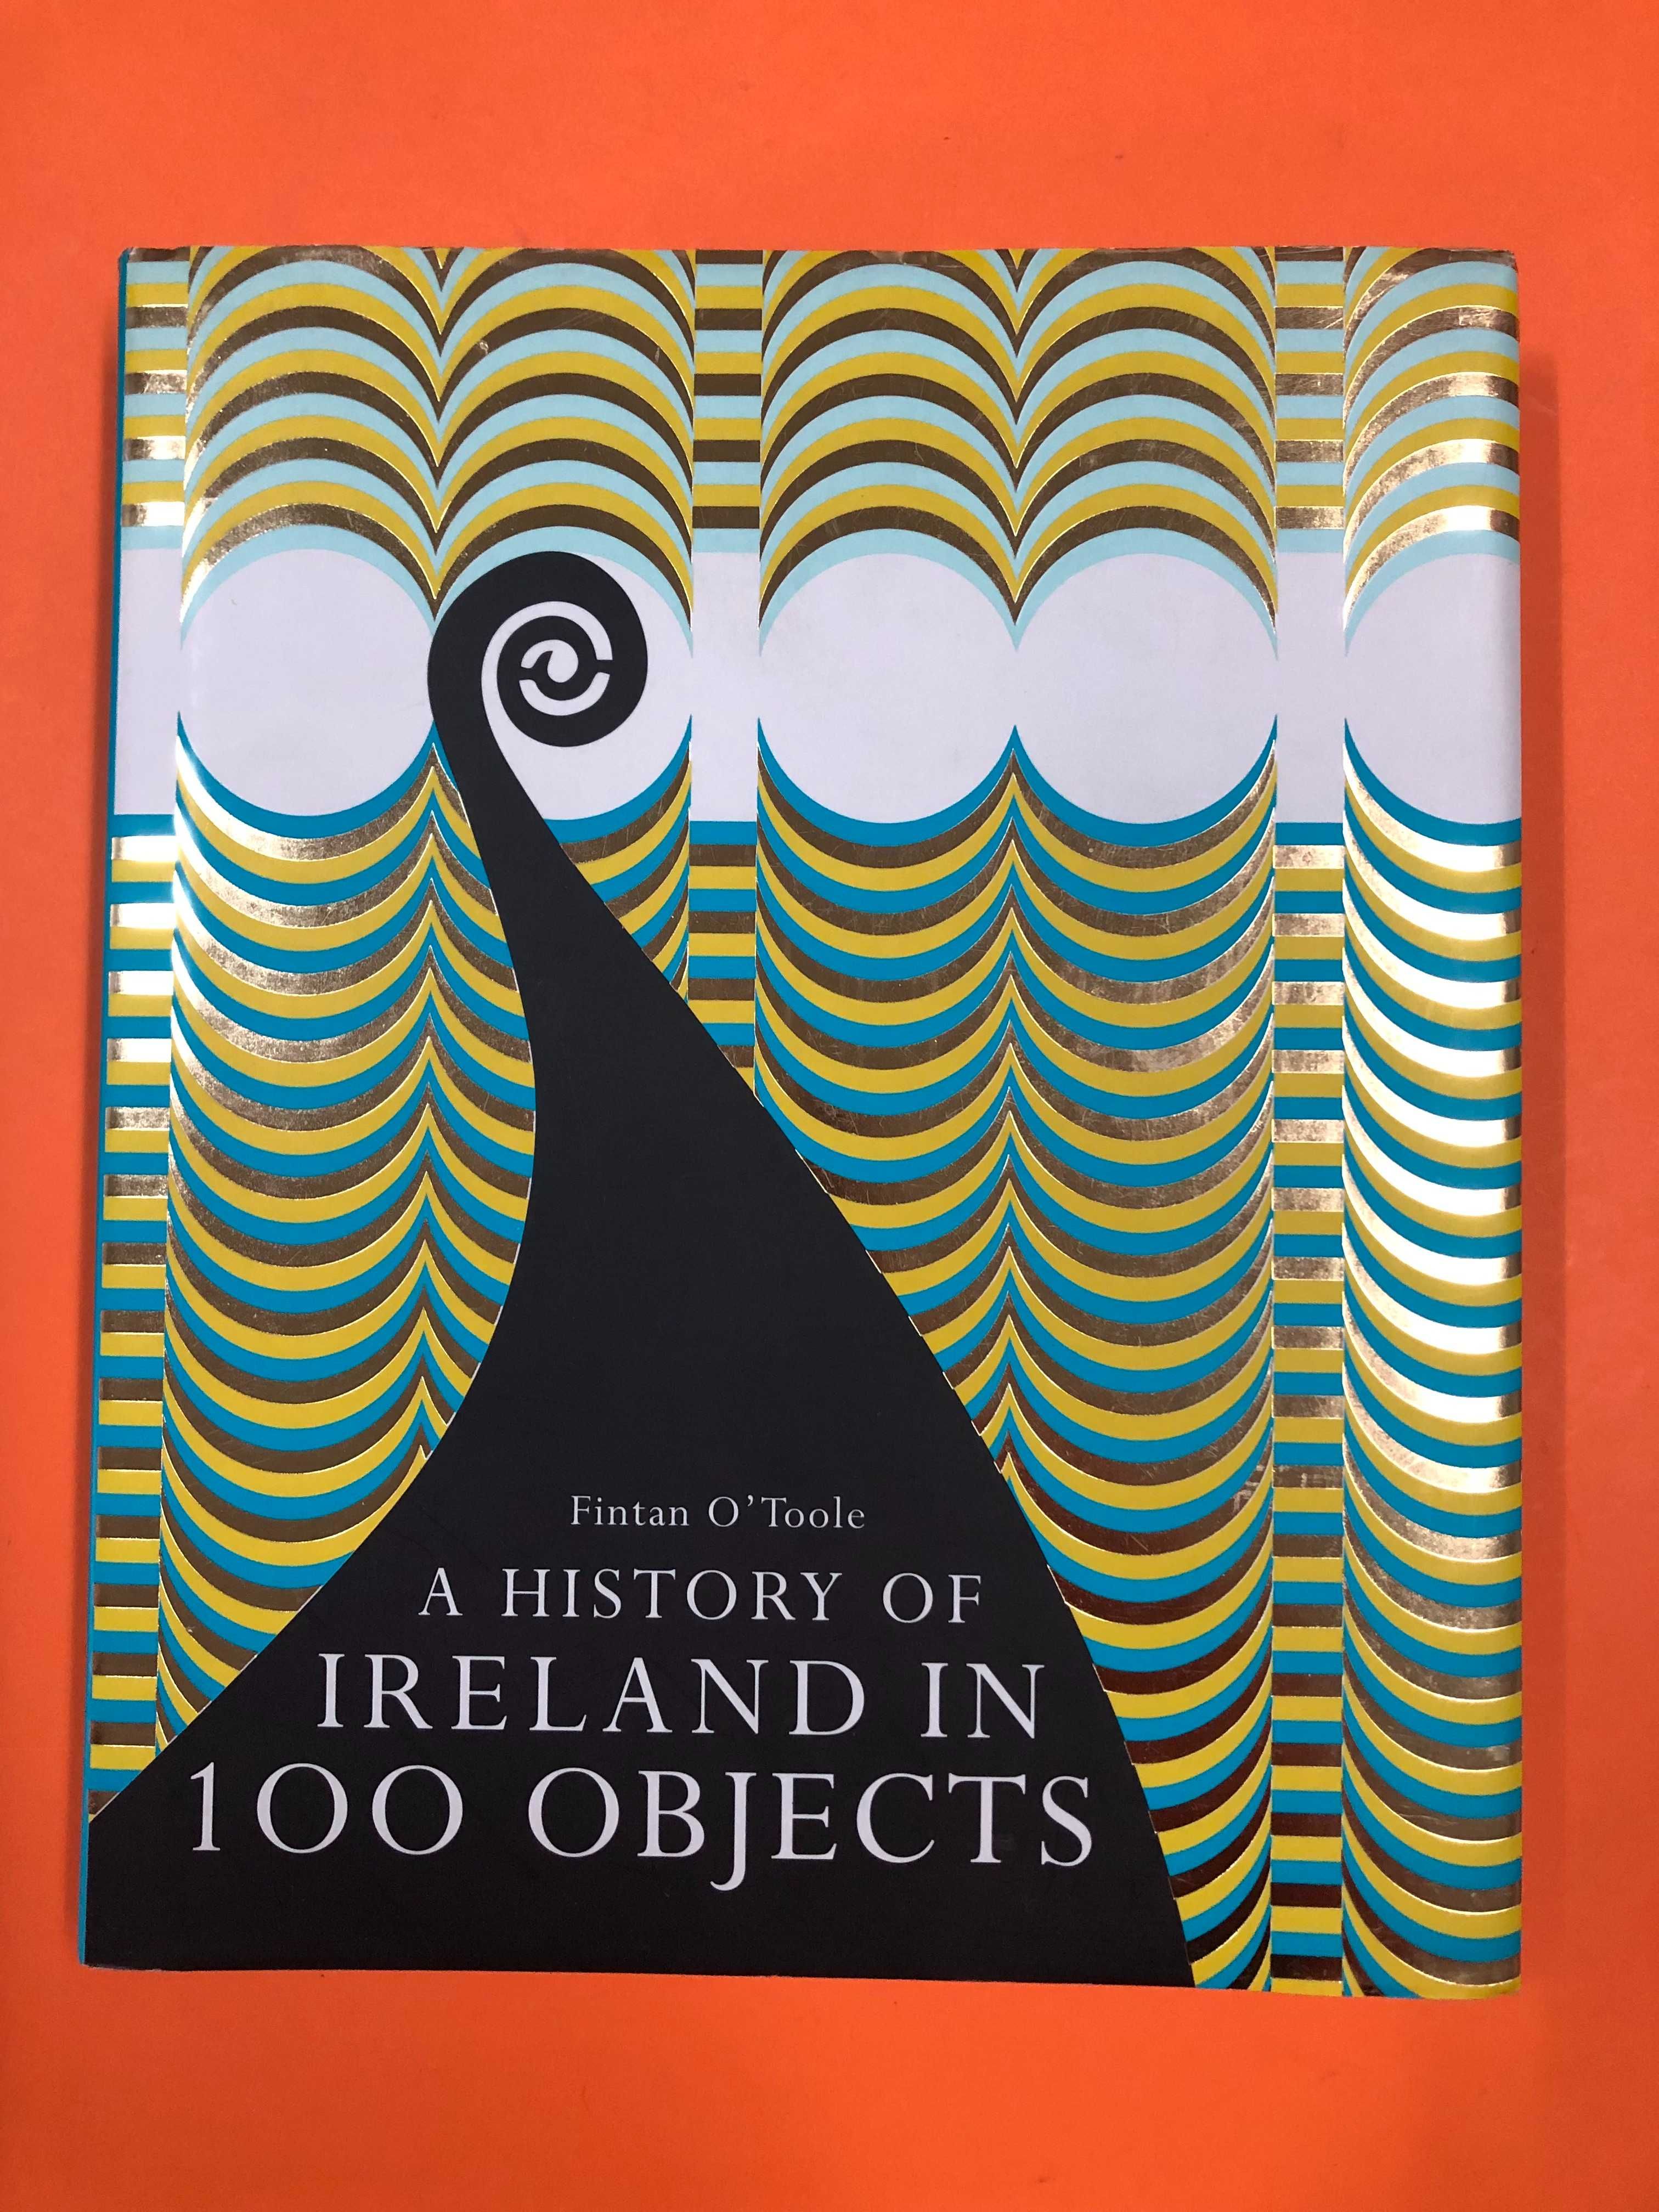 A History of Ireland in 100 Objects - Fintan O’Toole